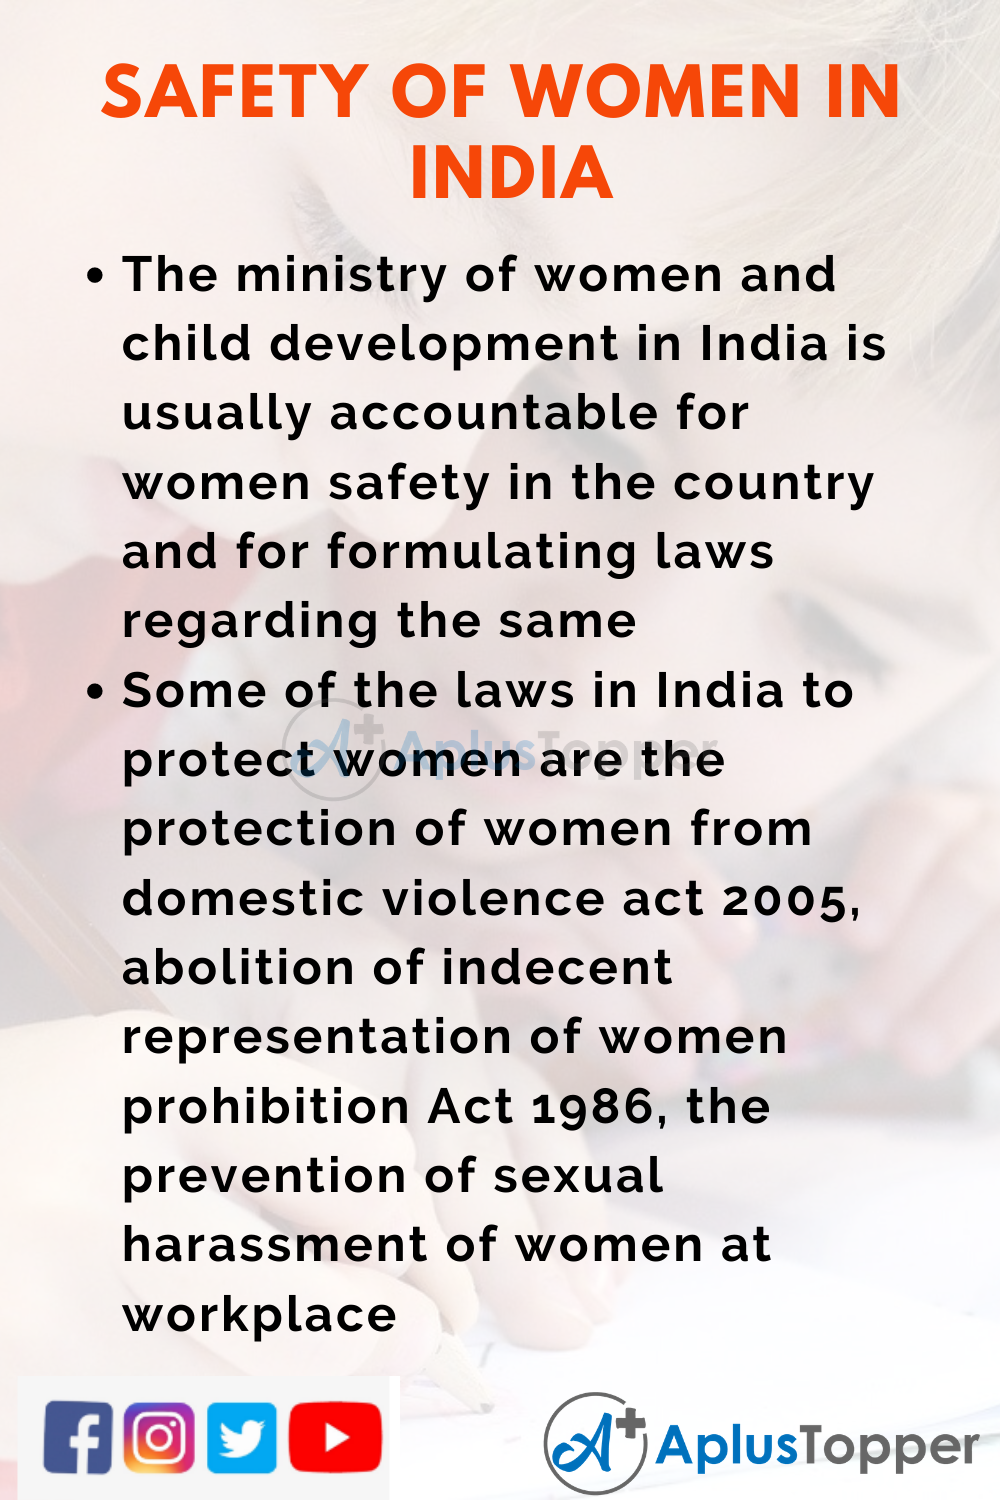 women safety in india essay upsc